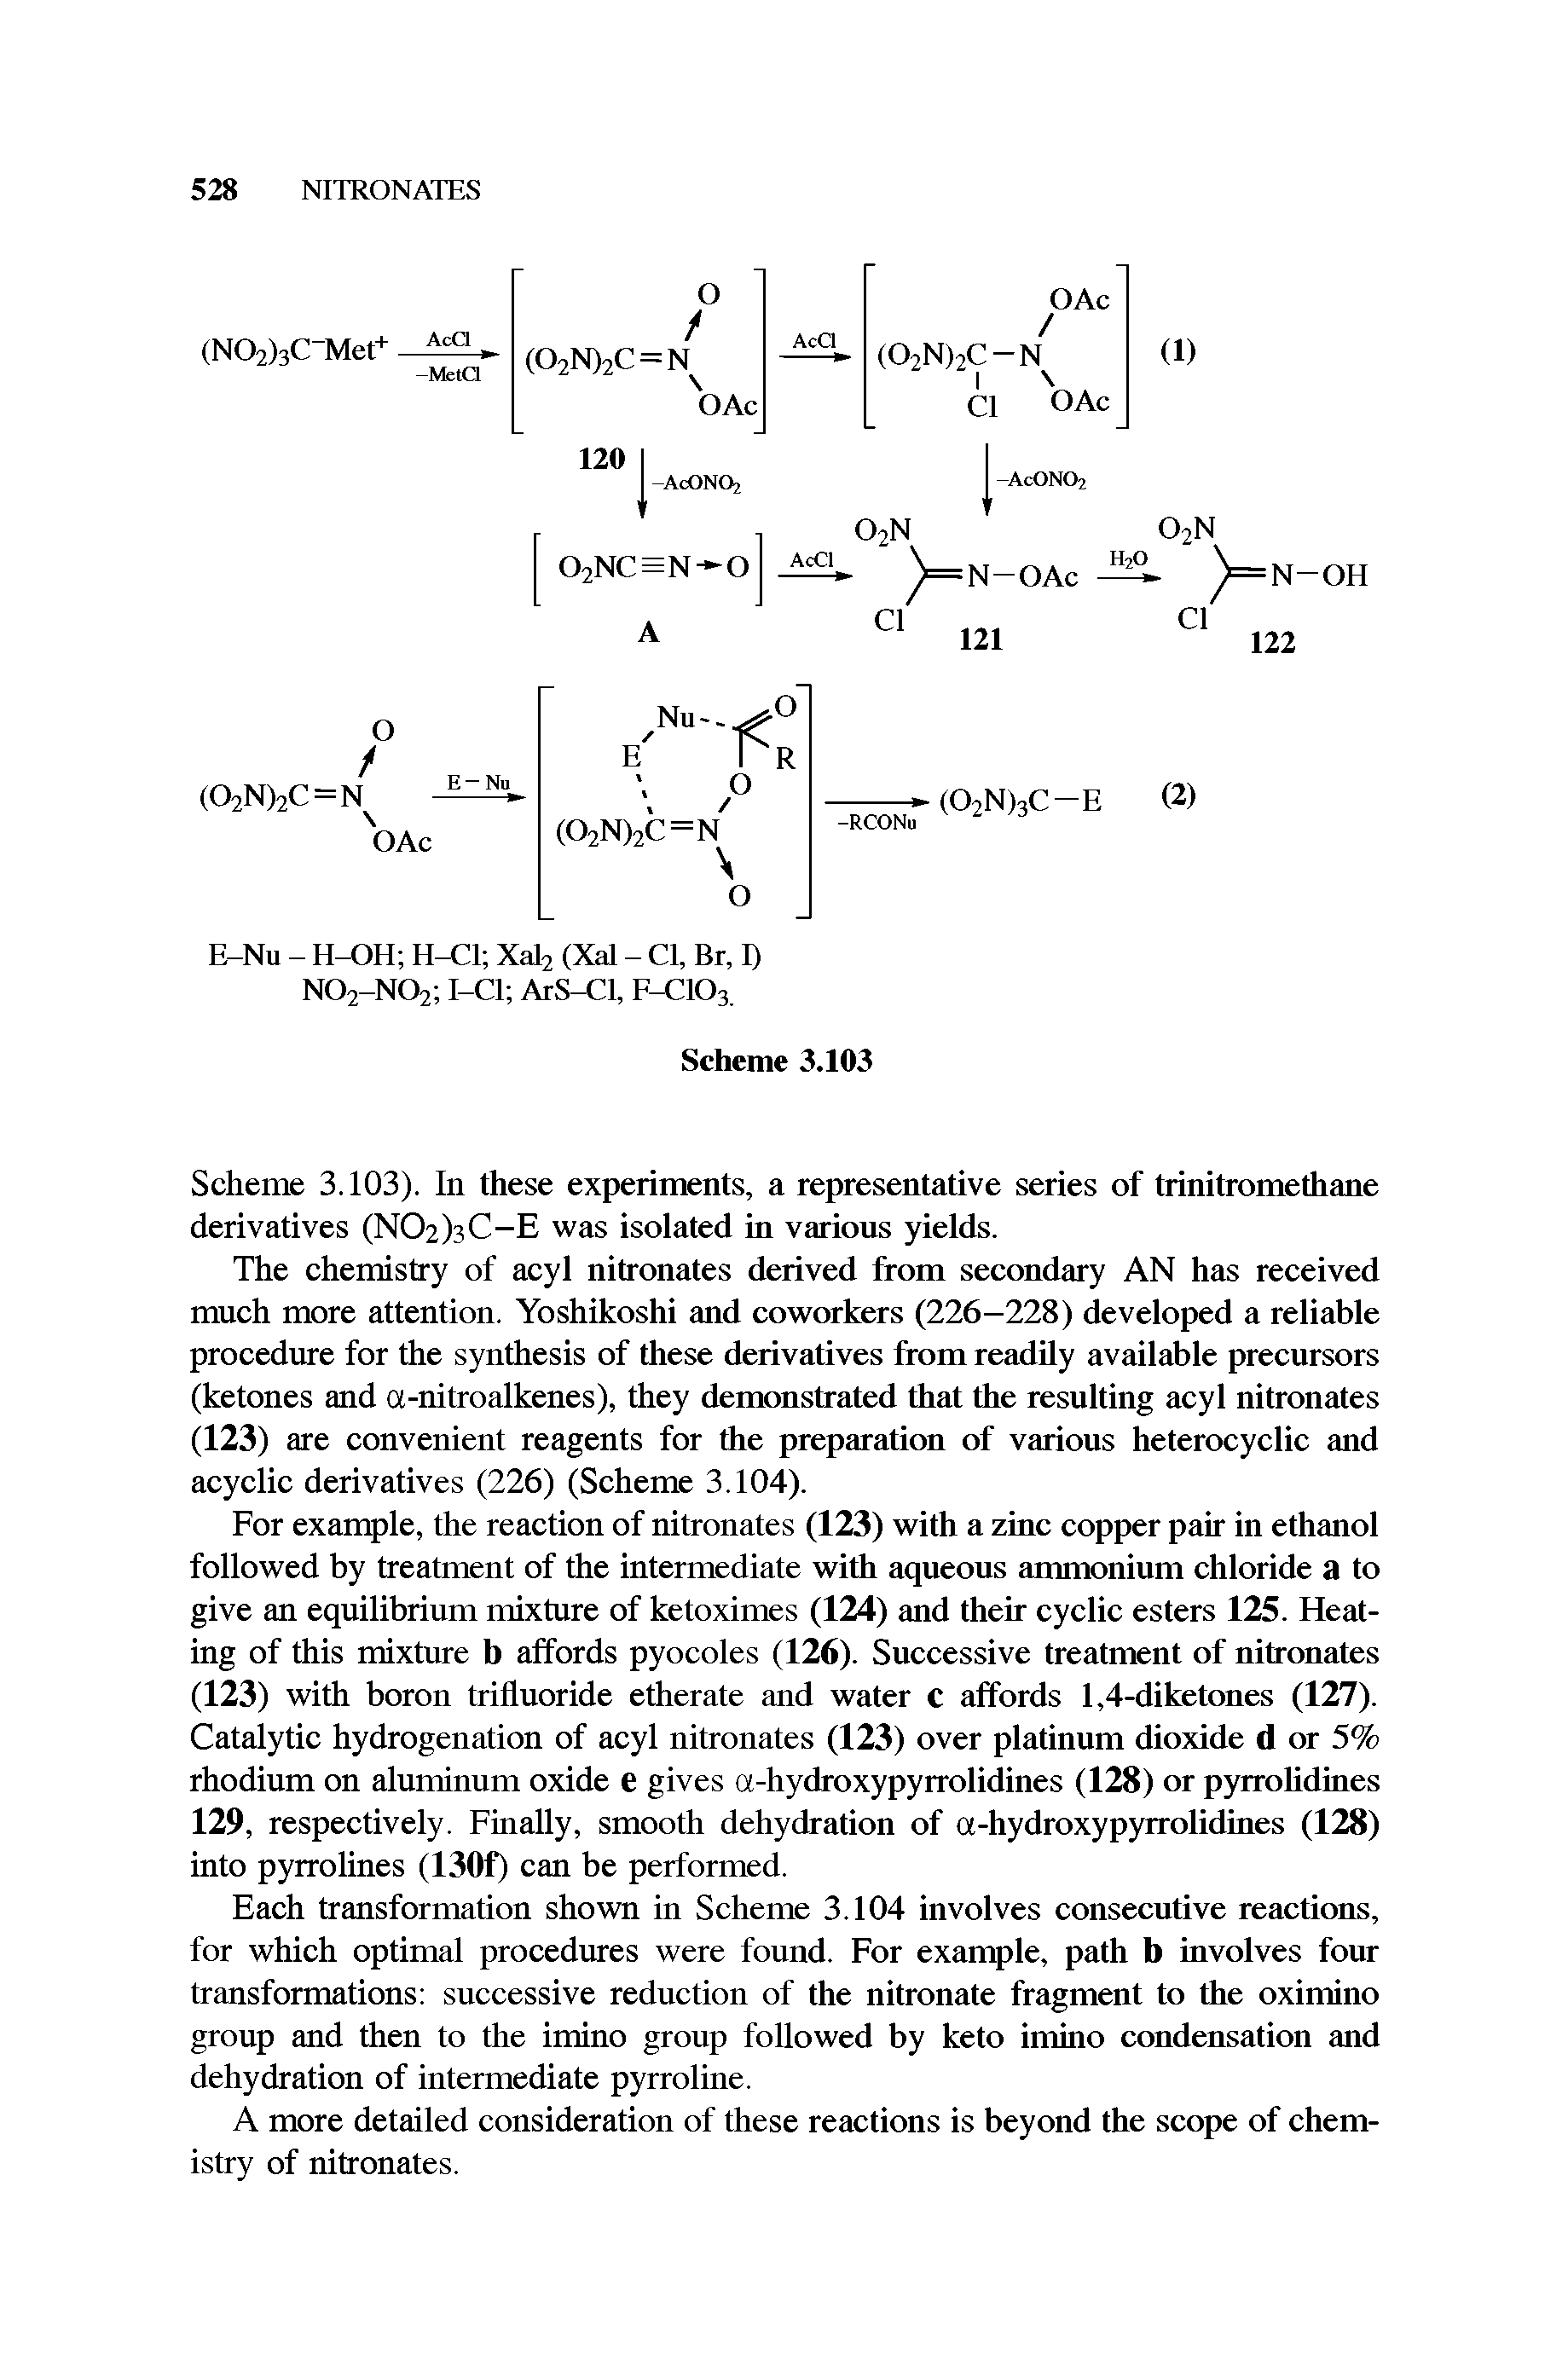 Scheme 3.103). In these experiments, a representative series of trinitromethane derivatives (NC C-E was isolated in various yields.